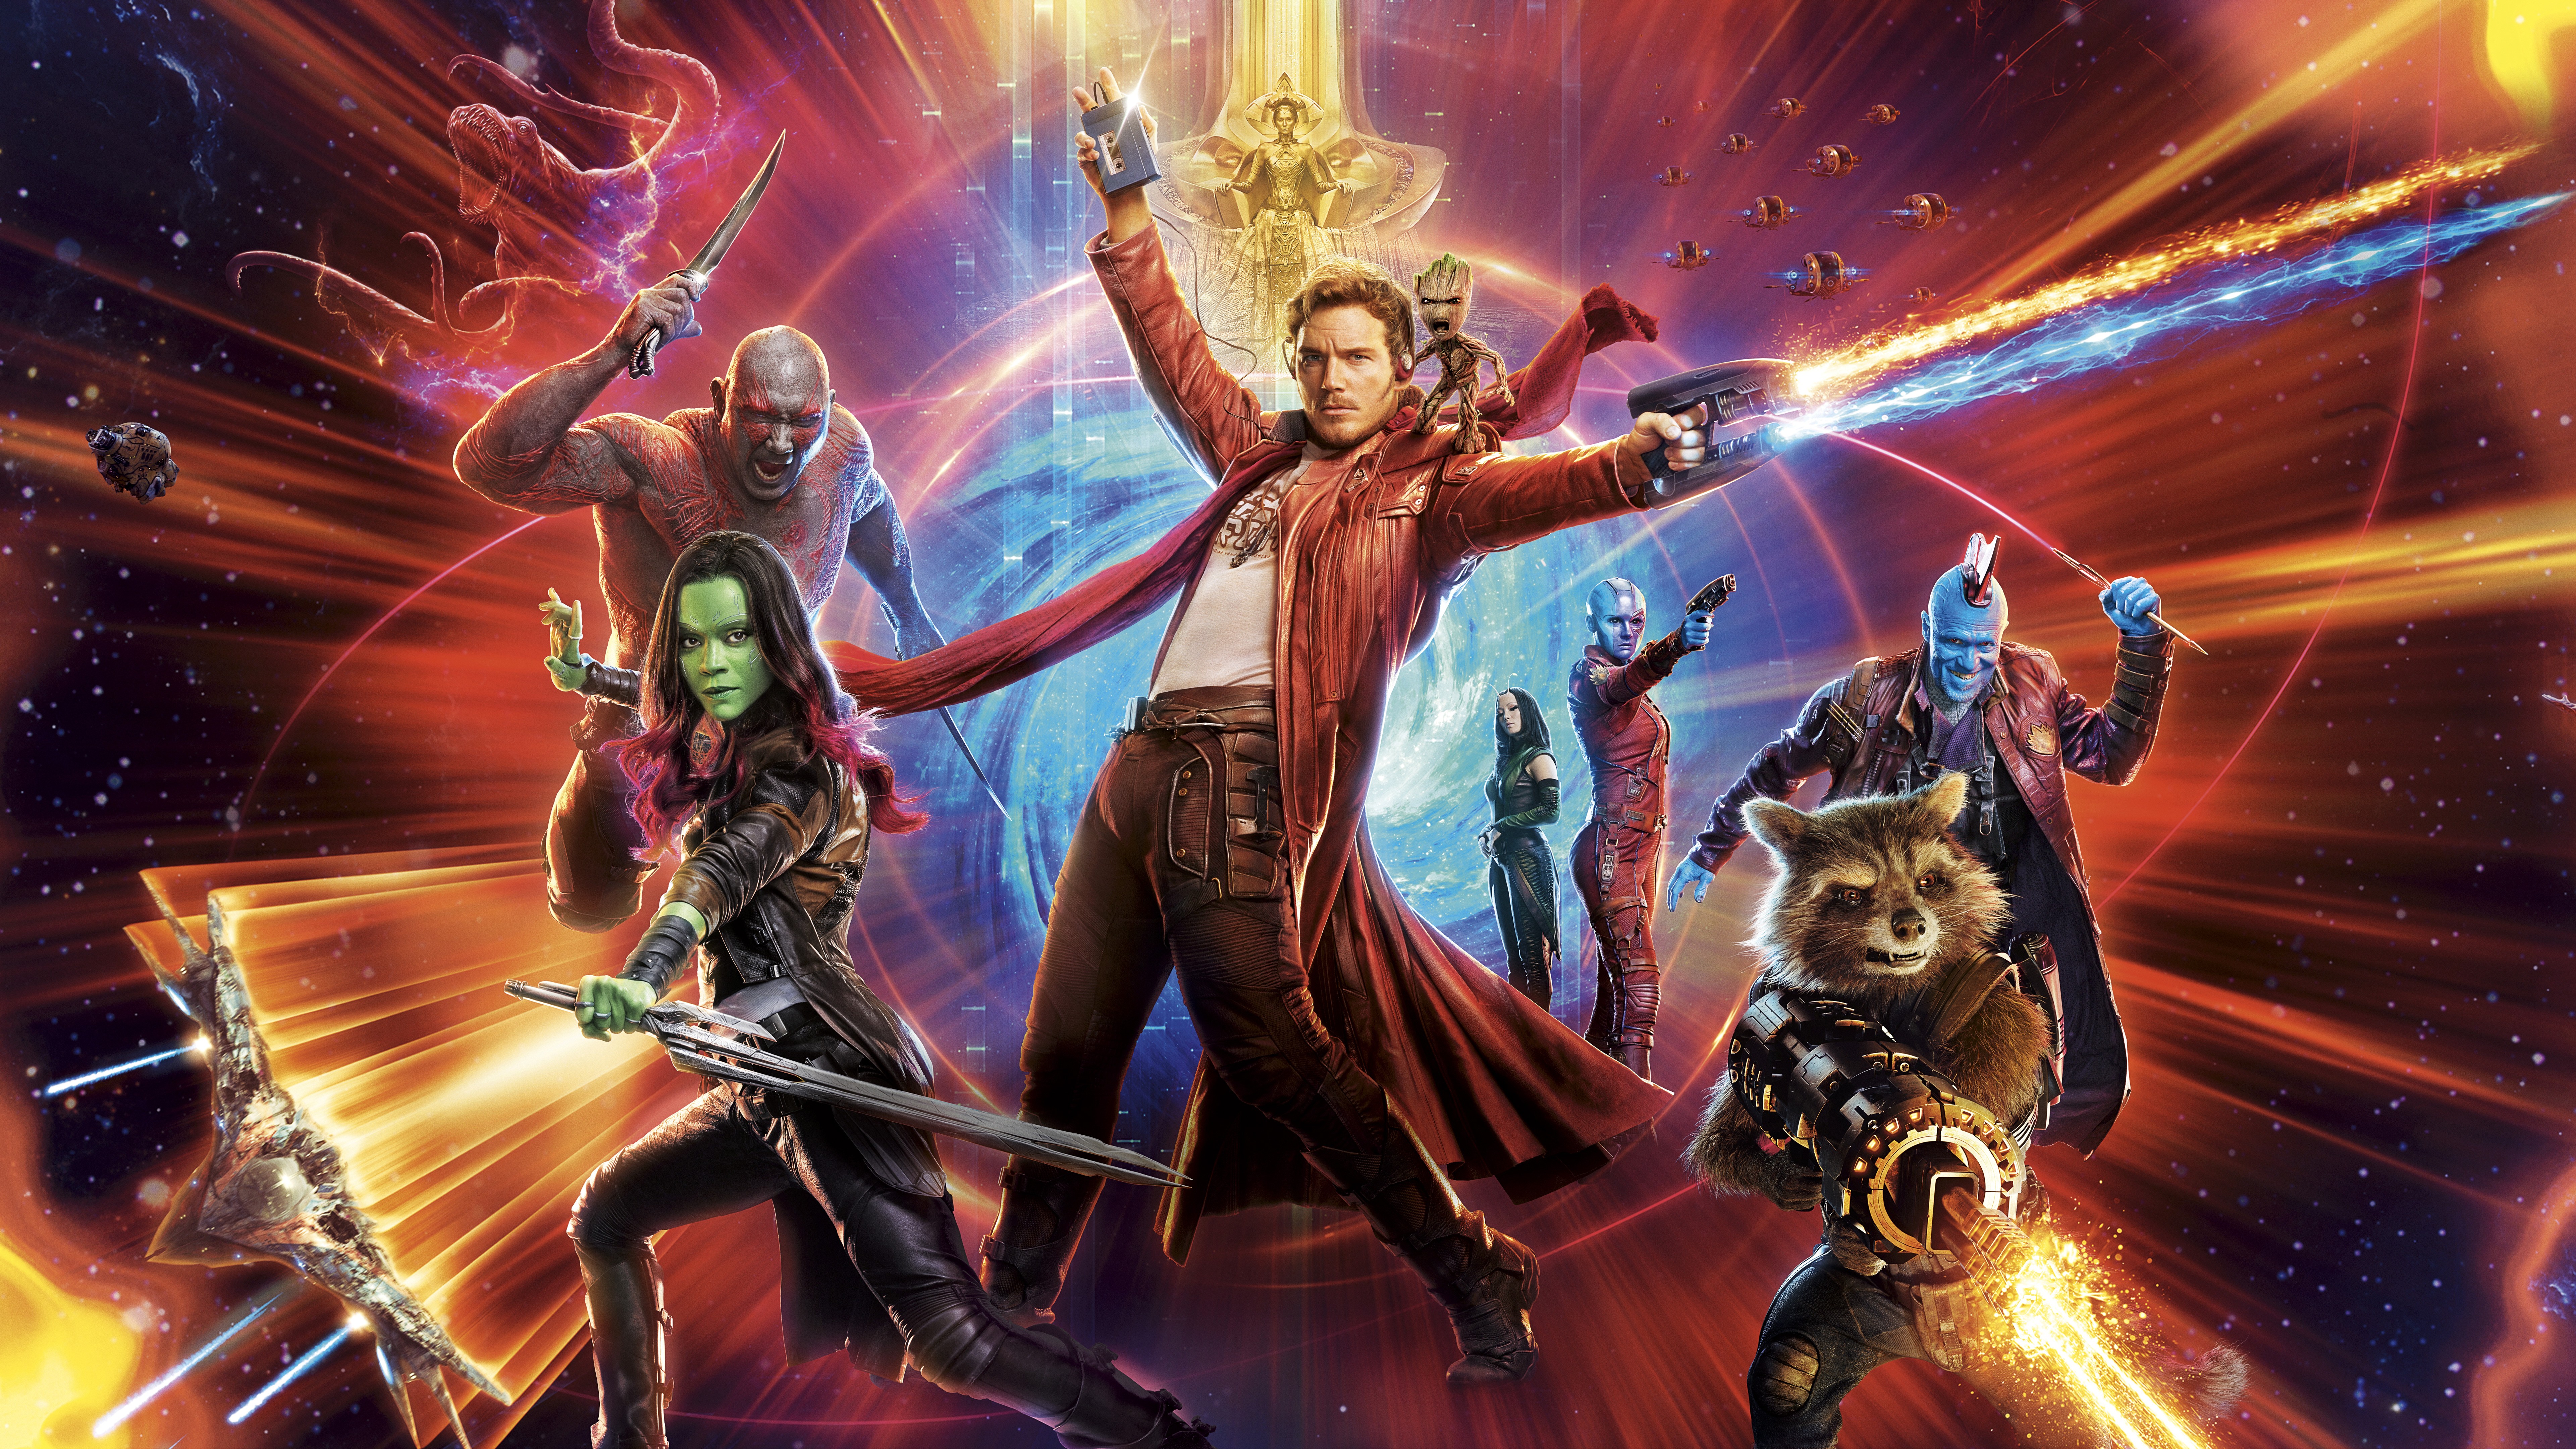 Guardians Of The Galaxy HD Wallpapers For Mobile - Download hd wallpapers